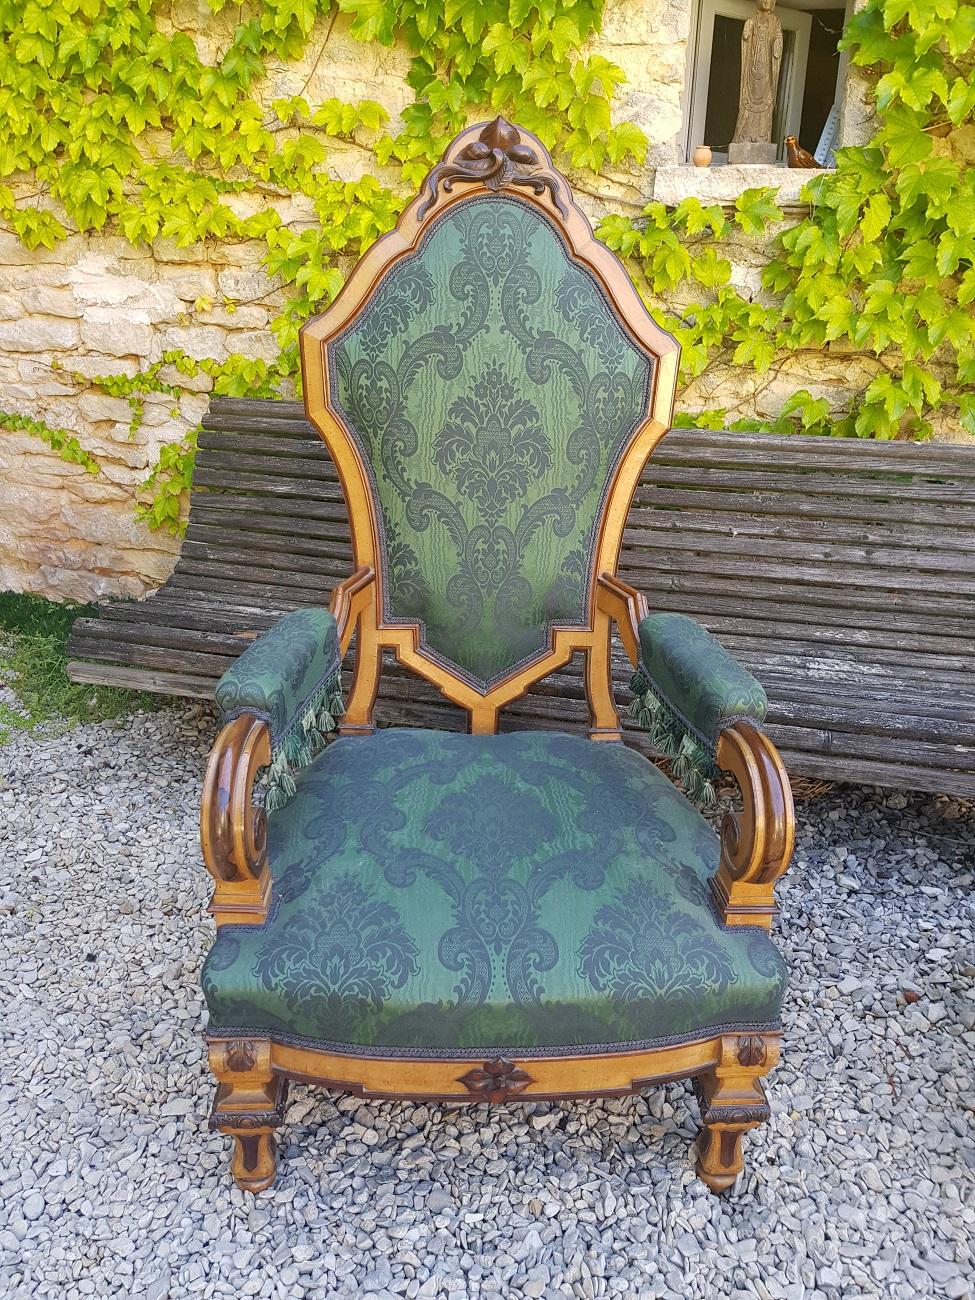 Set of two fabulous mid-19th century Southern German armchairs with new upholstery, they are made of nutwood and rosewood with a classical green upholstery.

The measurements are,
Depth 78 cm/ 30.7 inch.
Width 66 cm/ 25.9 inch.
Height 125 cm/